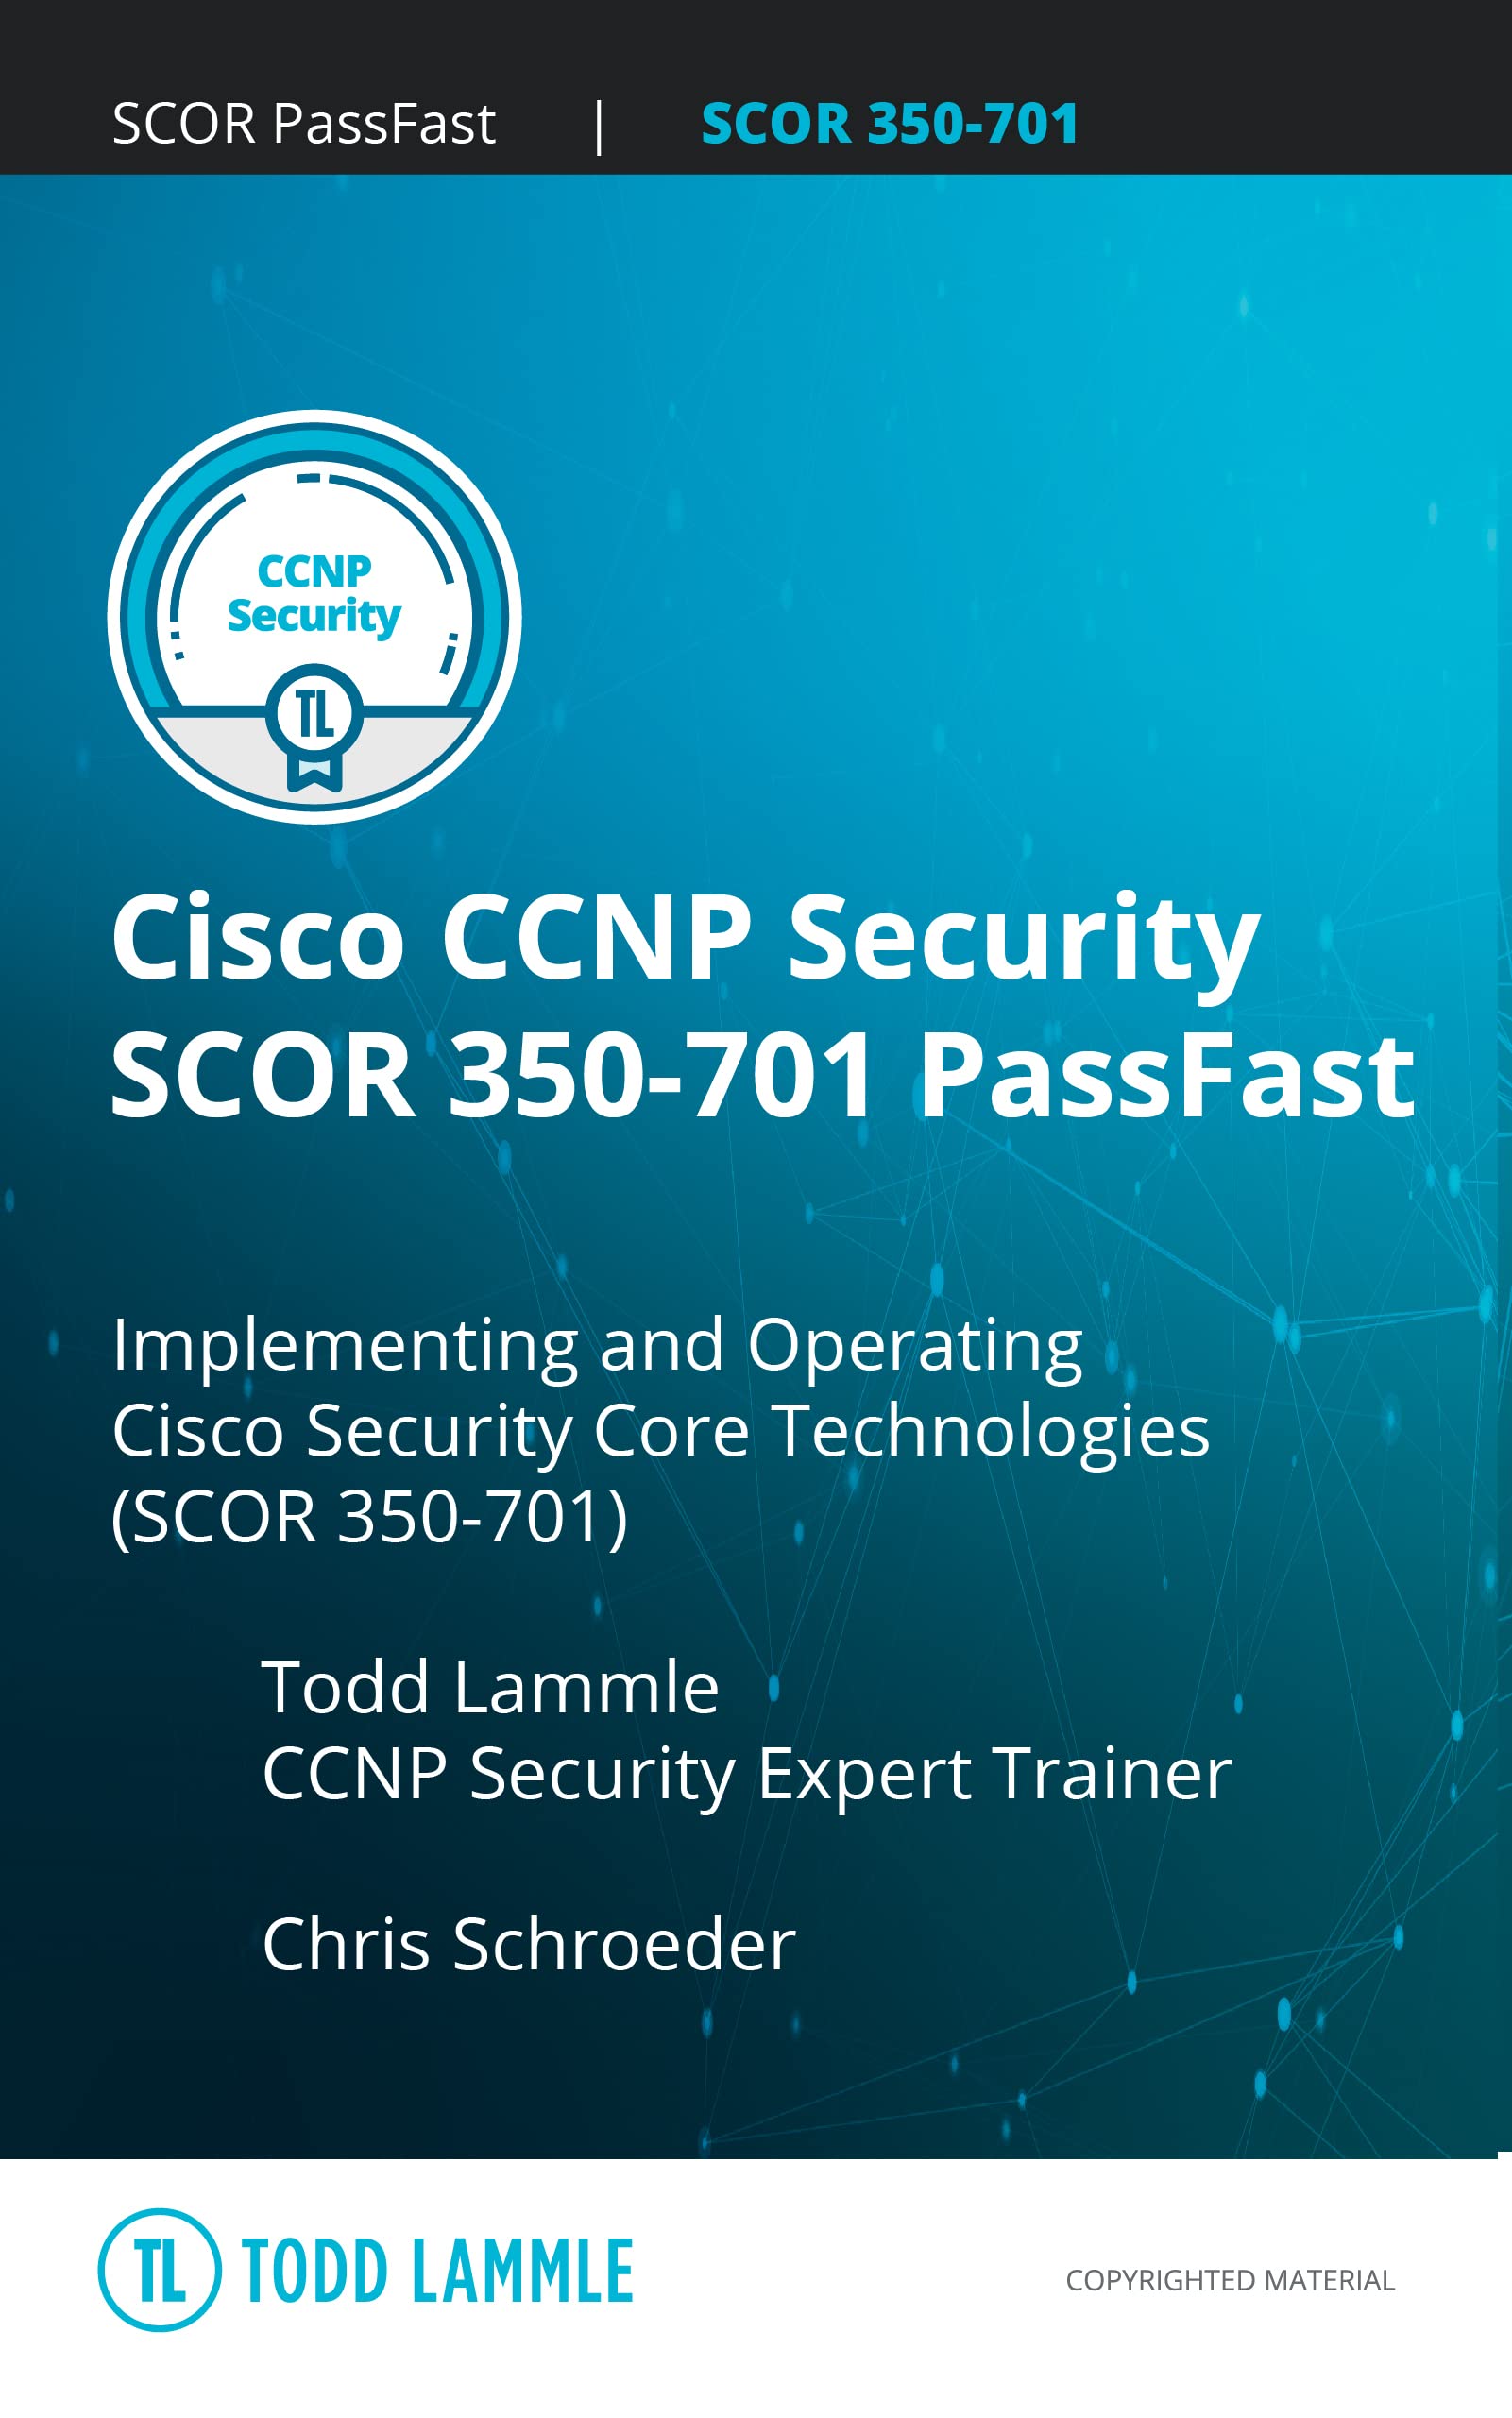 Cisco CCNP Security SCOR 350-701 PassFast: Implementing and Operating Cisco Security Core Technologies (SCOR) 350-701 (Todd Lammle Authorized Study Guides)